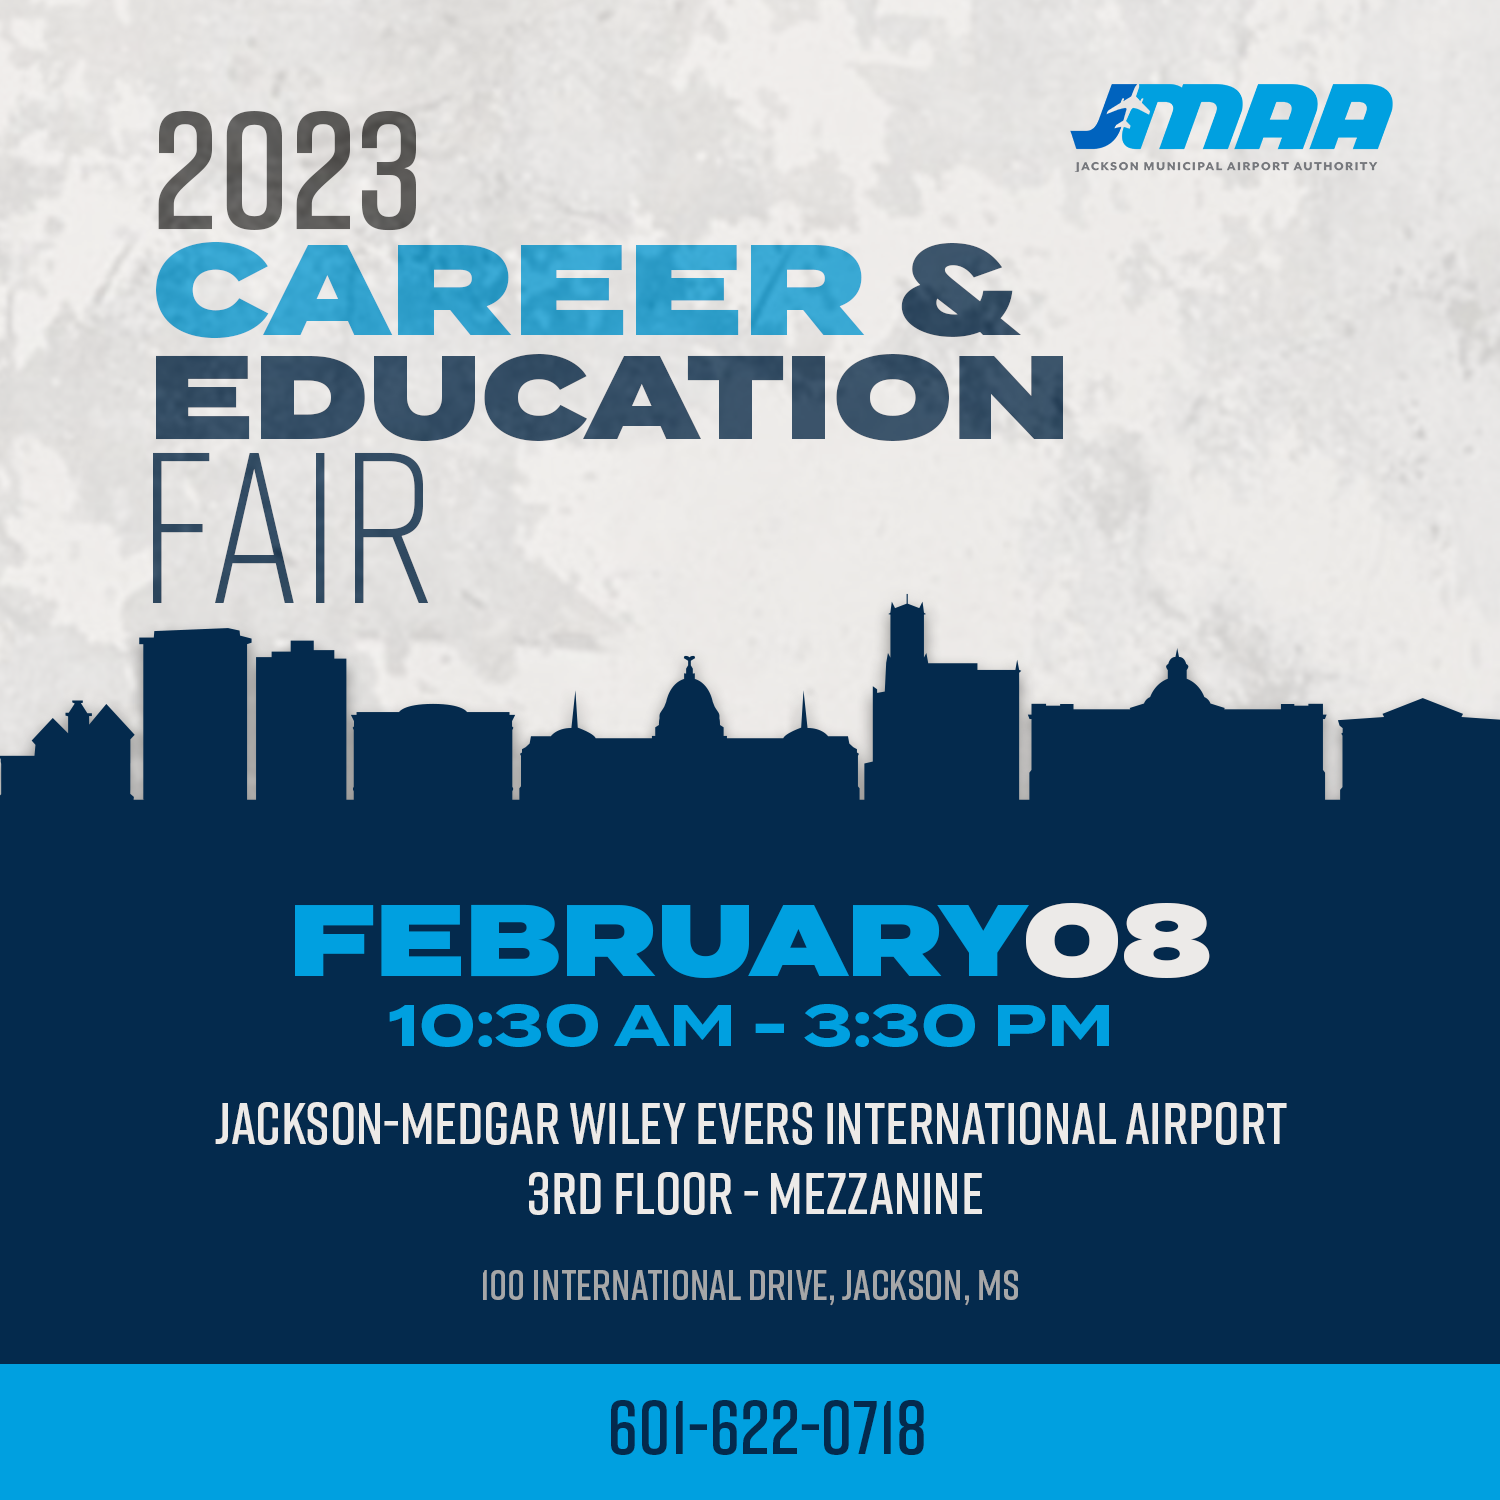 Jackson Municipal Airport Authority to Host Career & Education Fair; Partners with Local Business, Colleges, and Universities to Provide Unique Career and Education Informational Opportunities